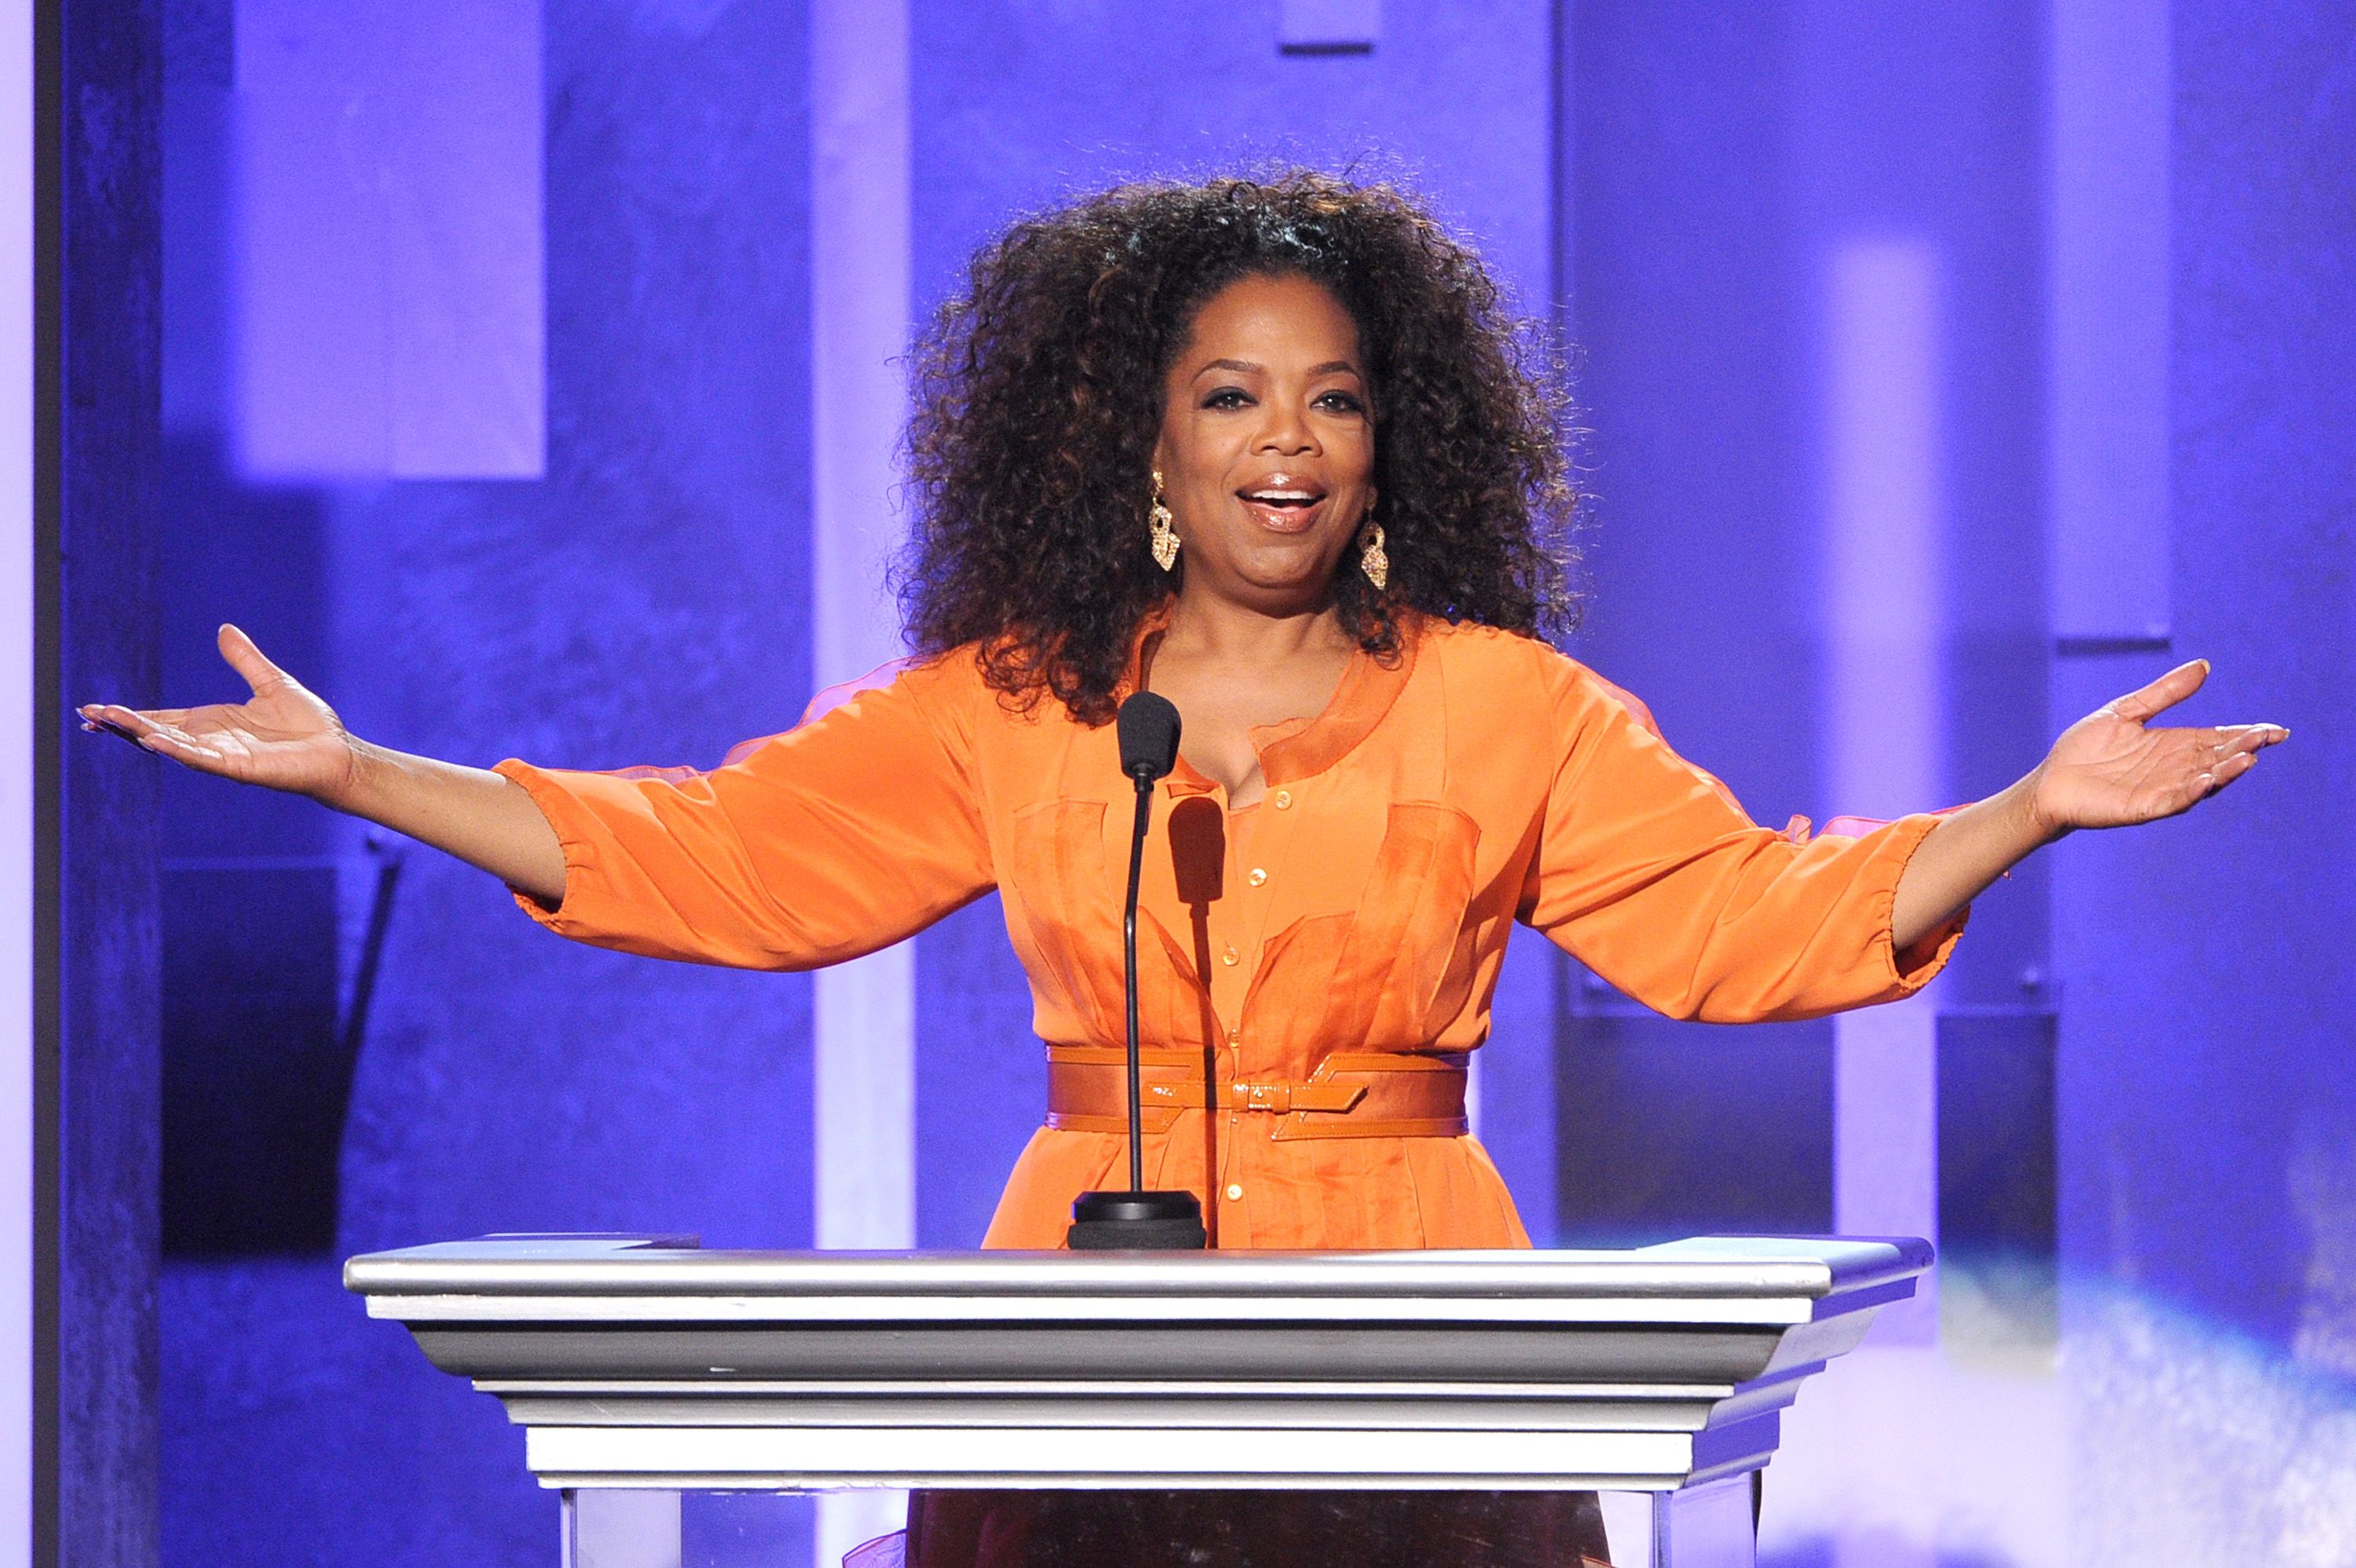 Weight watching? Here's how Oprah can help